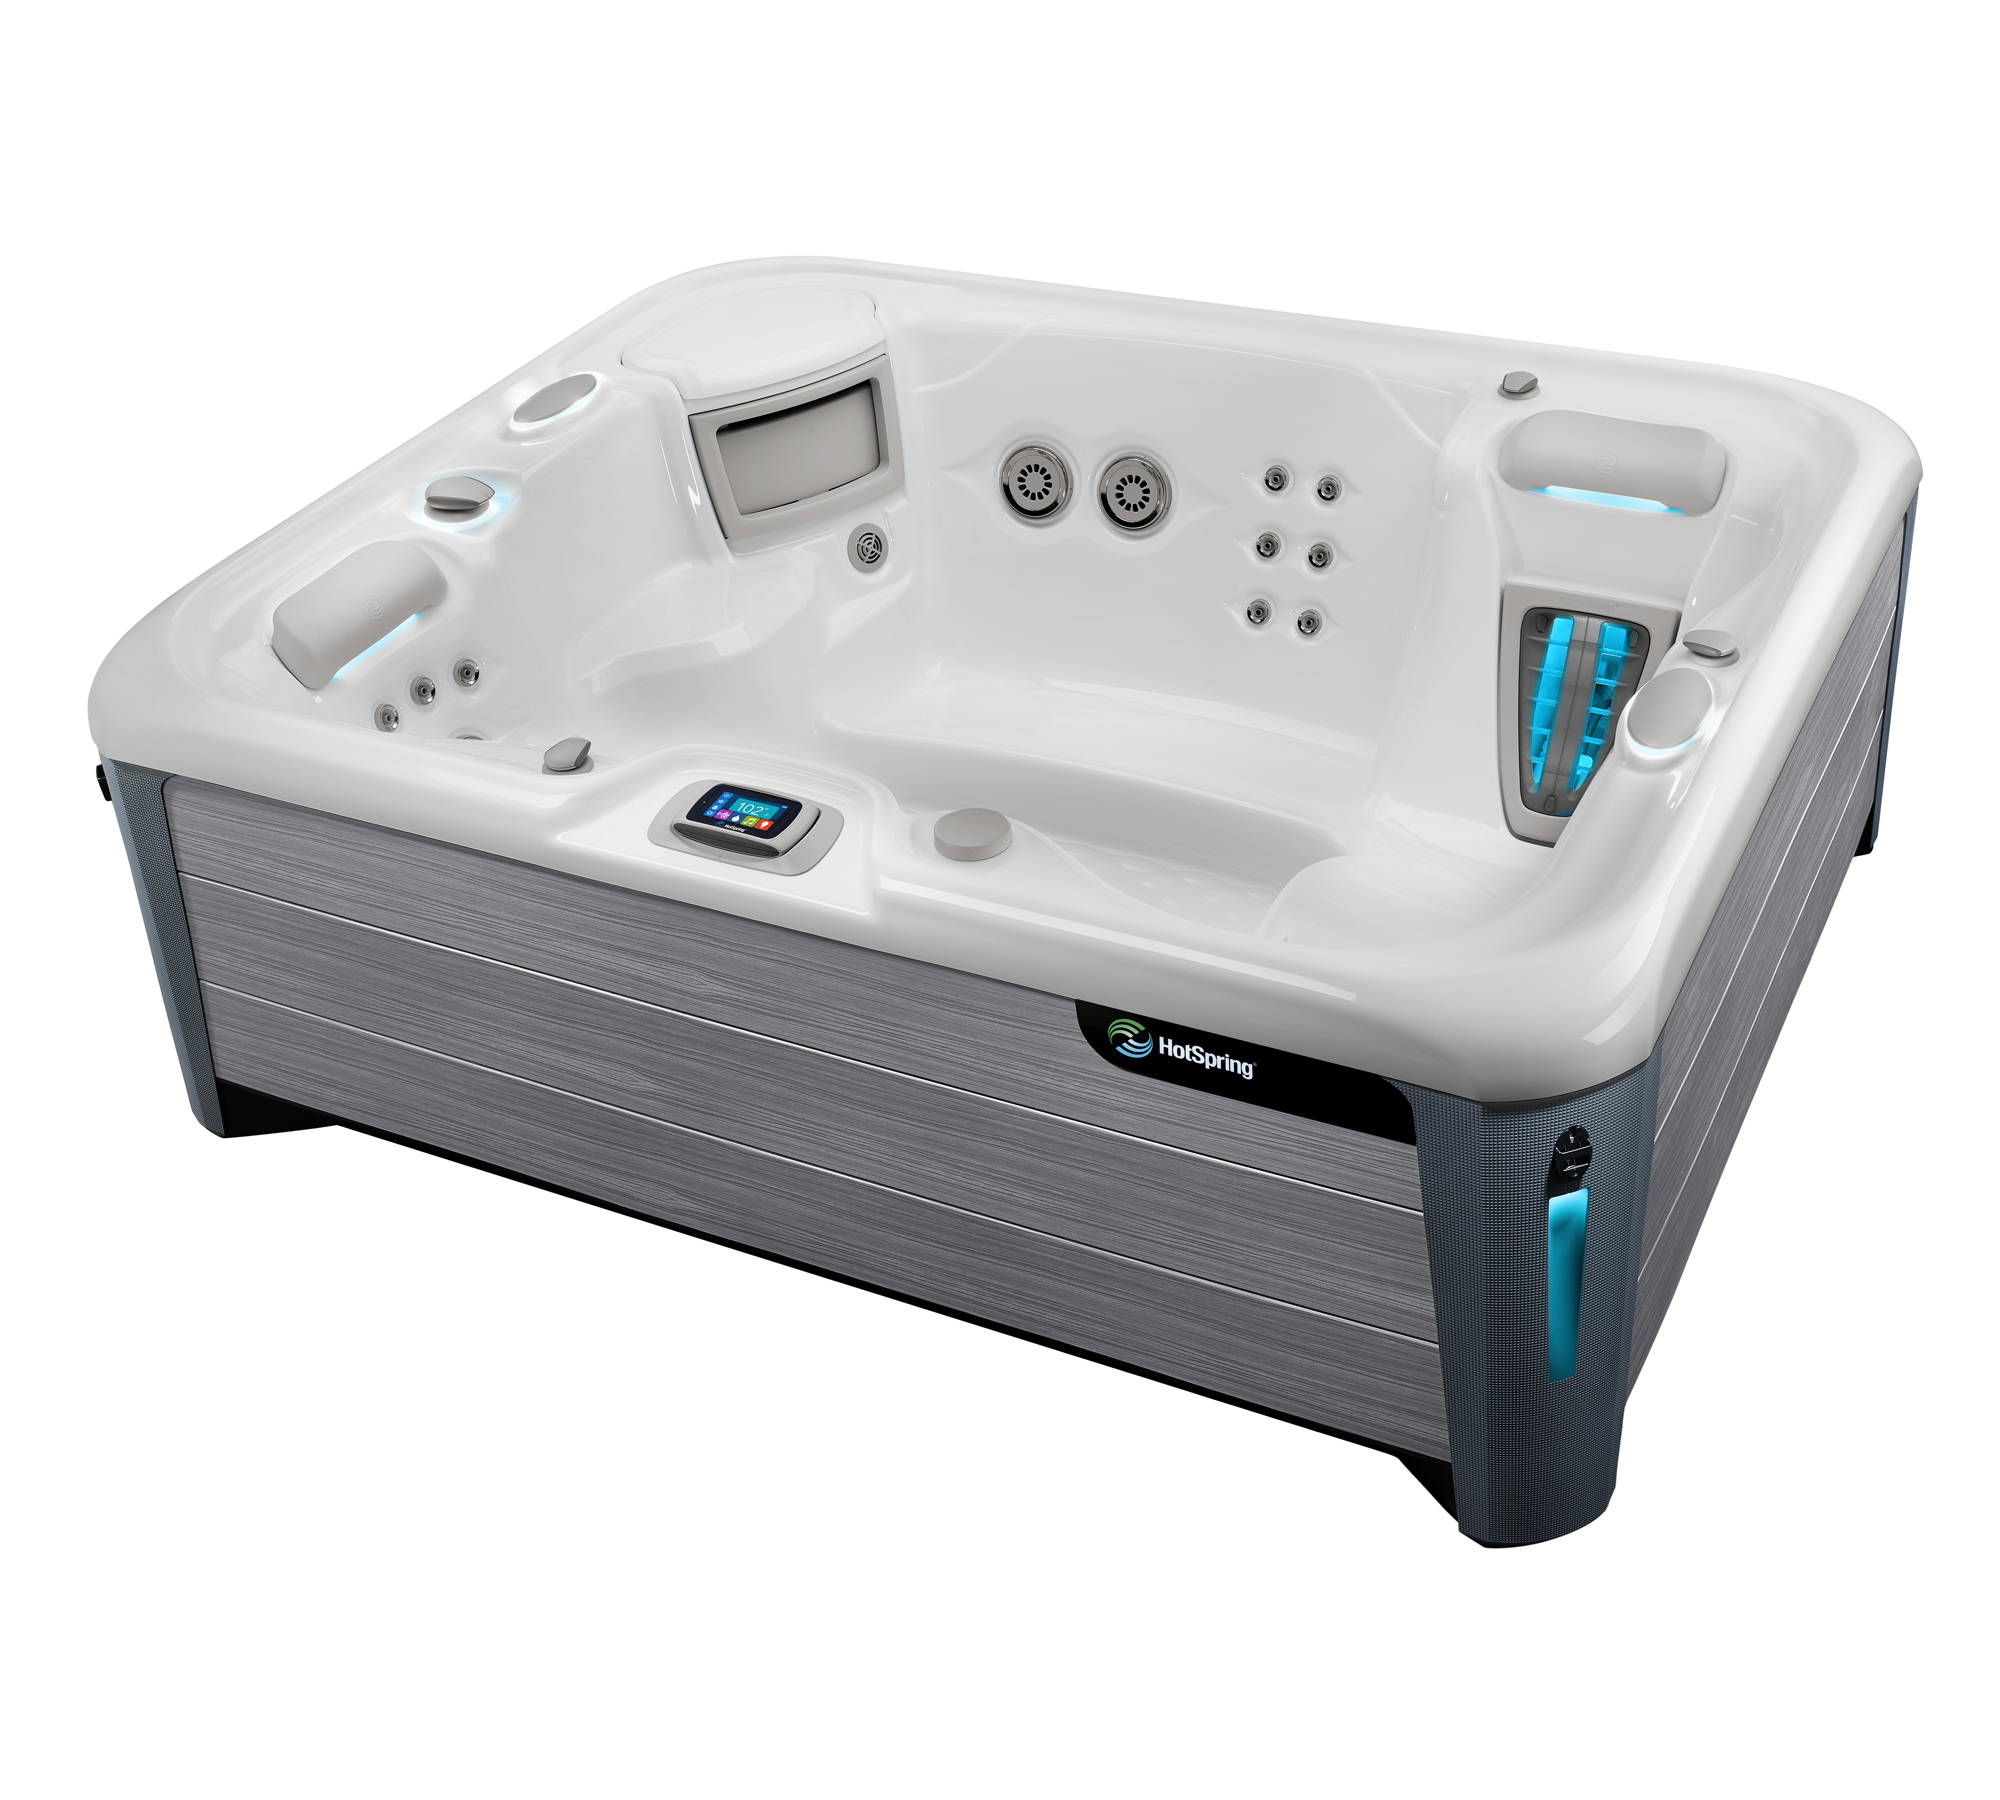 To lounge or not to lounge? That is often the burning hot tub buying question